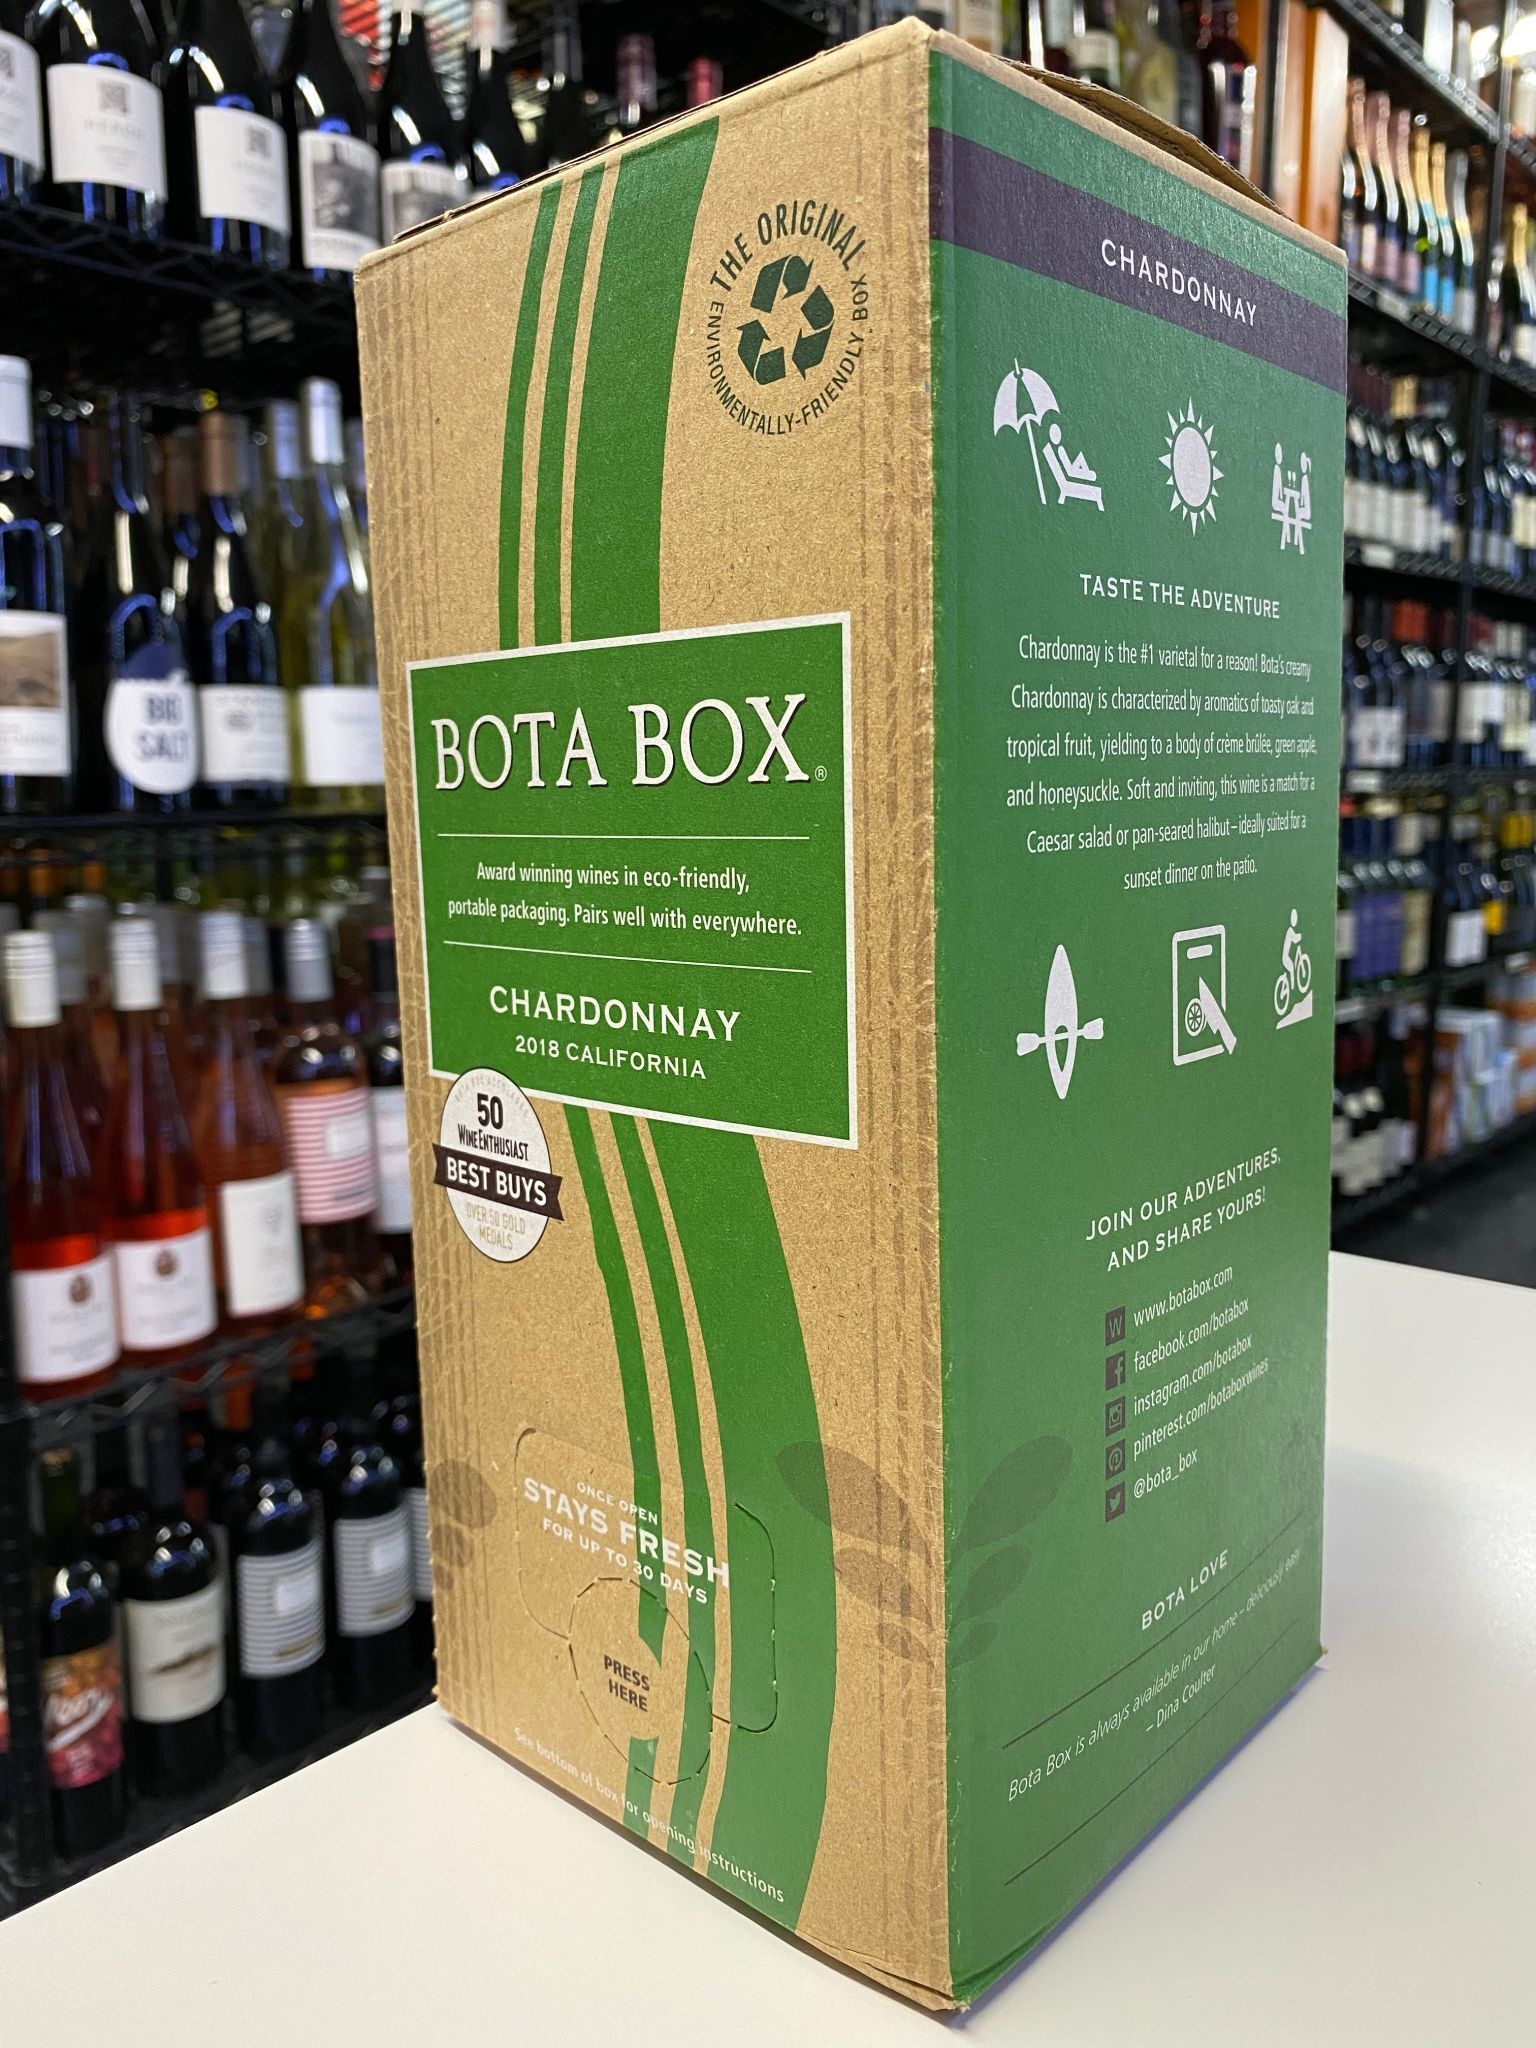 45 Boxed Wines Ranked From Best To Worst